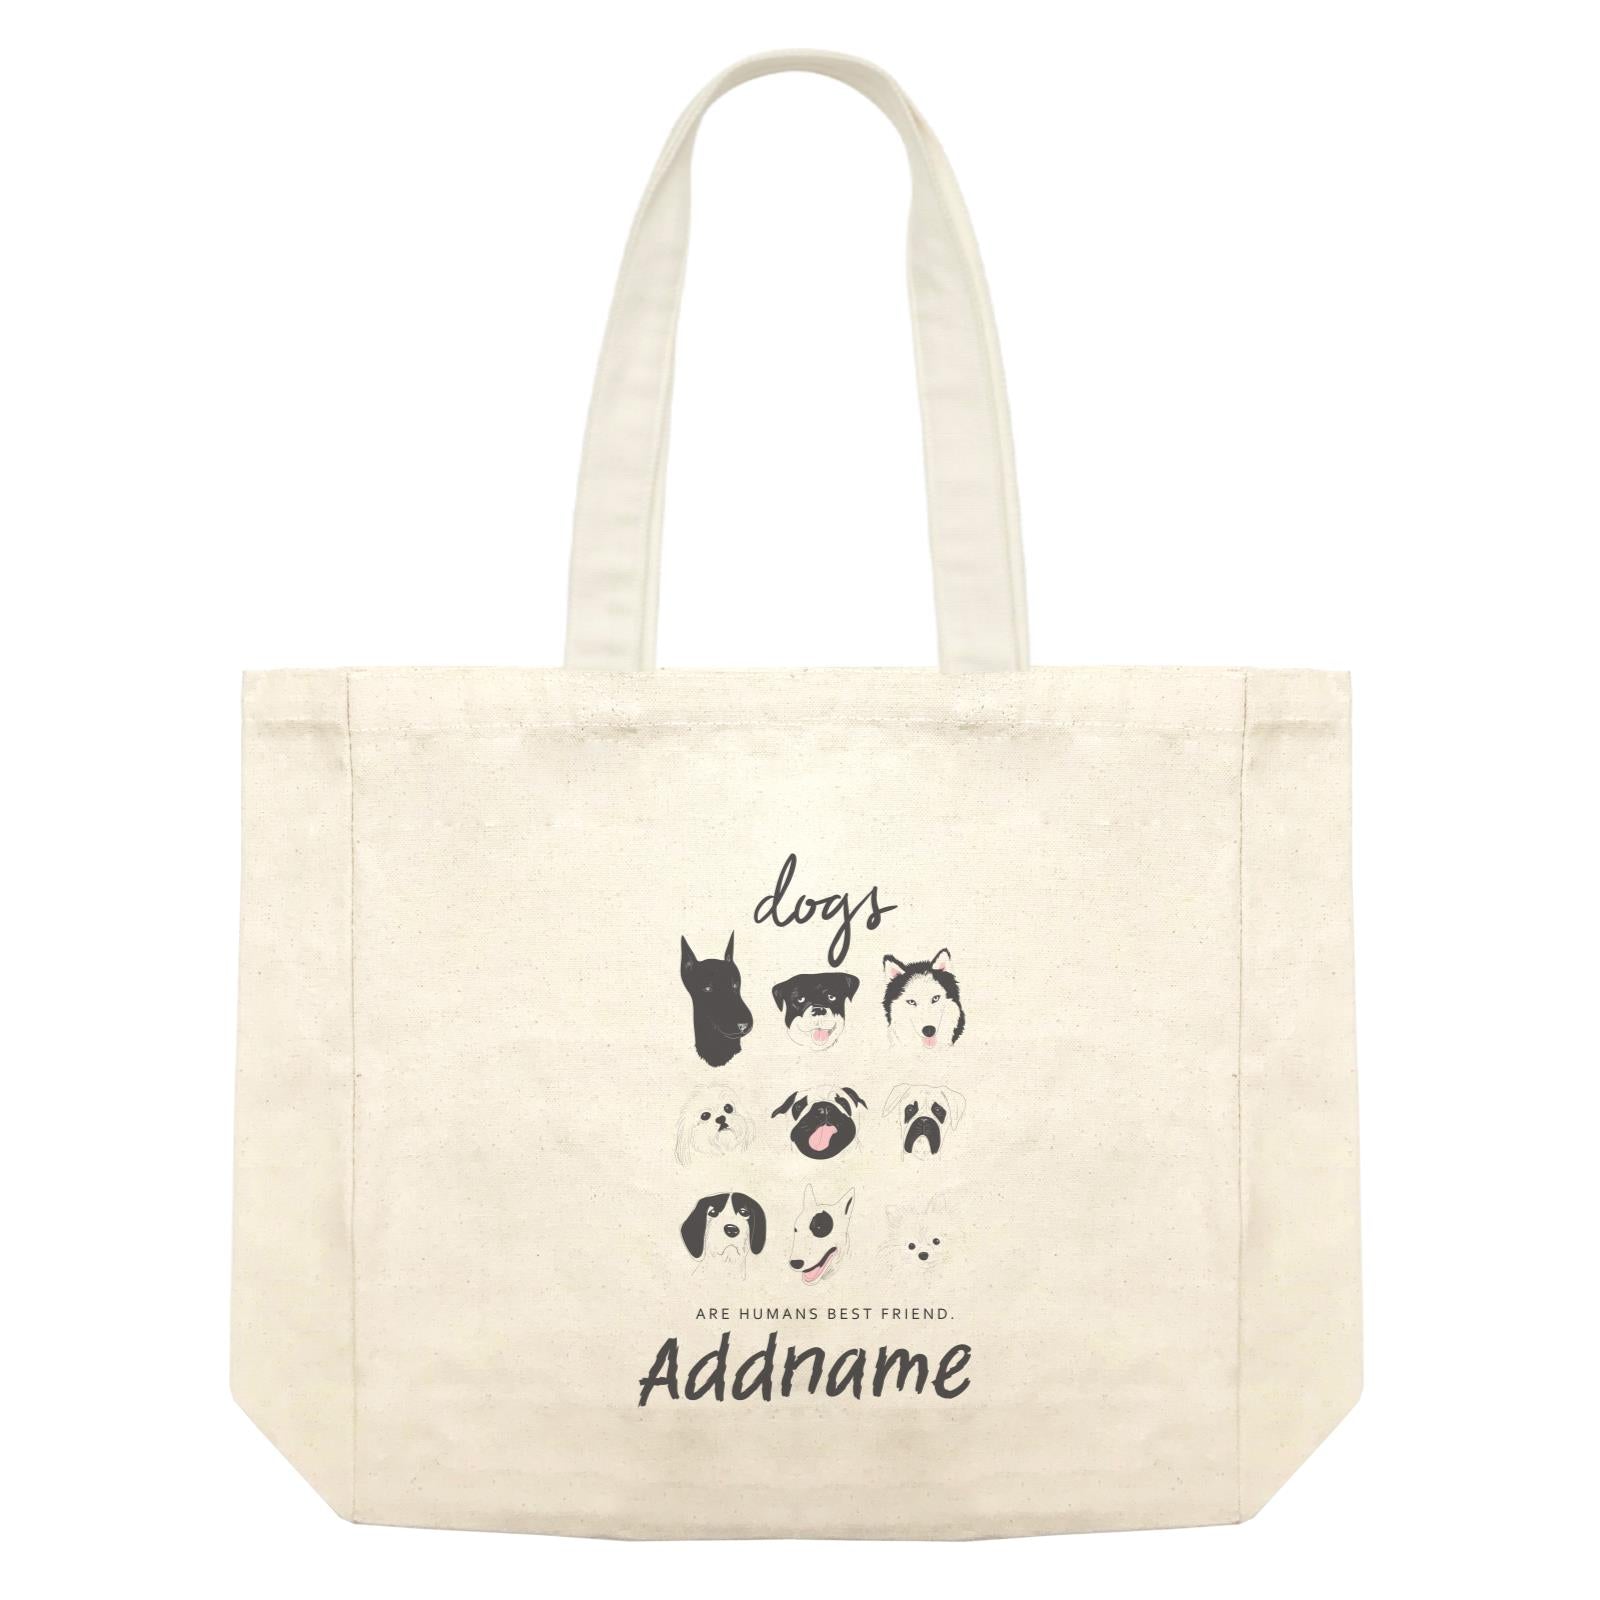 Funny Hand Drawn Animals Dogs Are Human Best Friends With Addname Shopping Bag